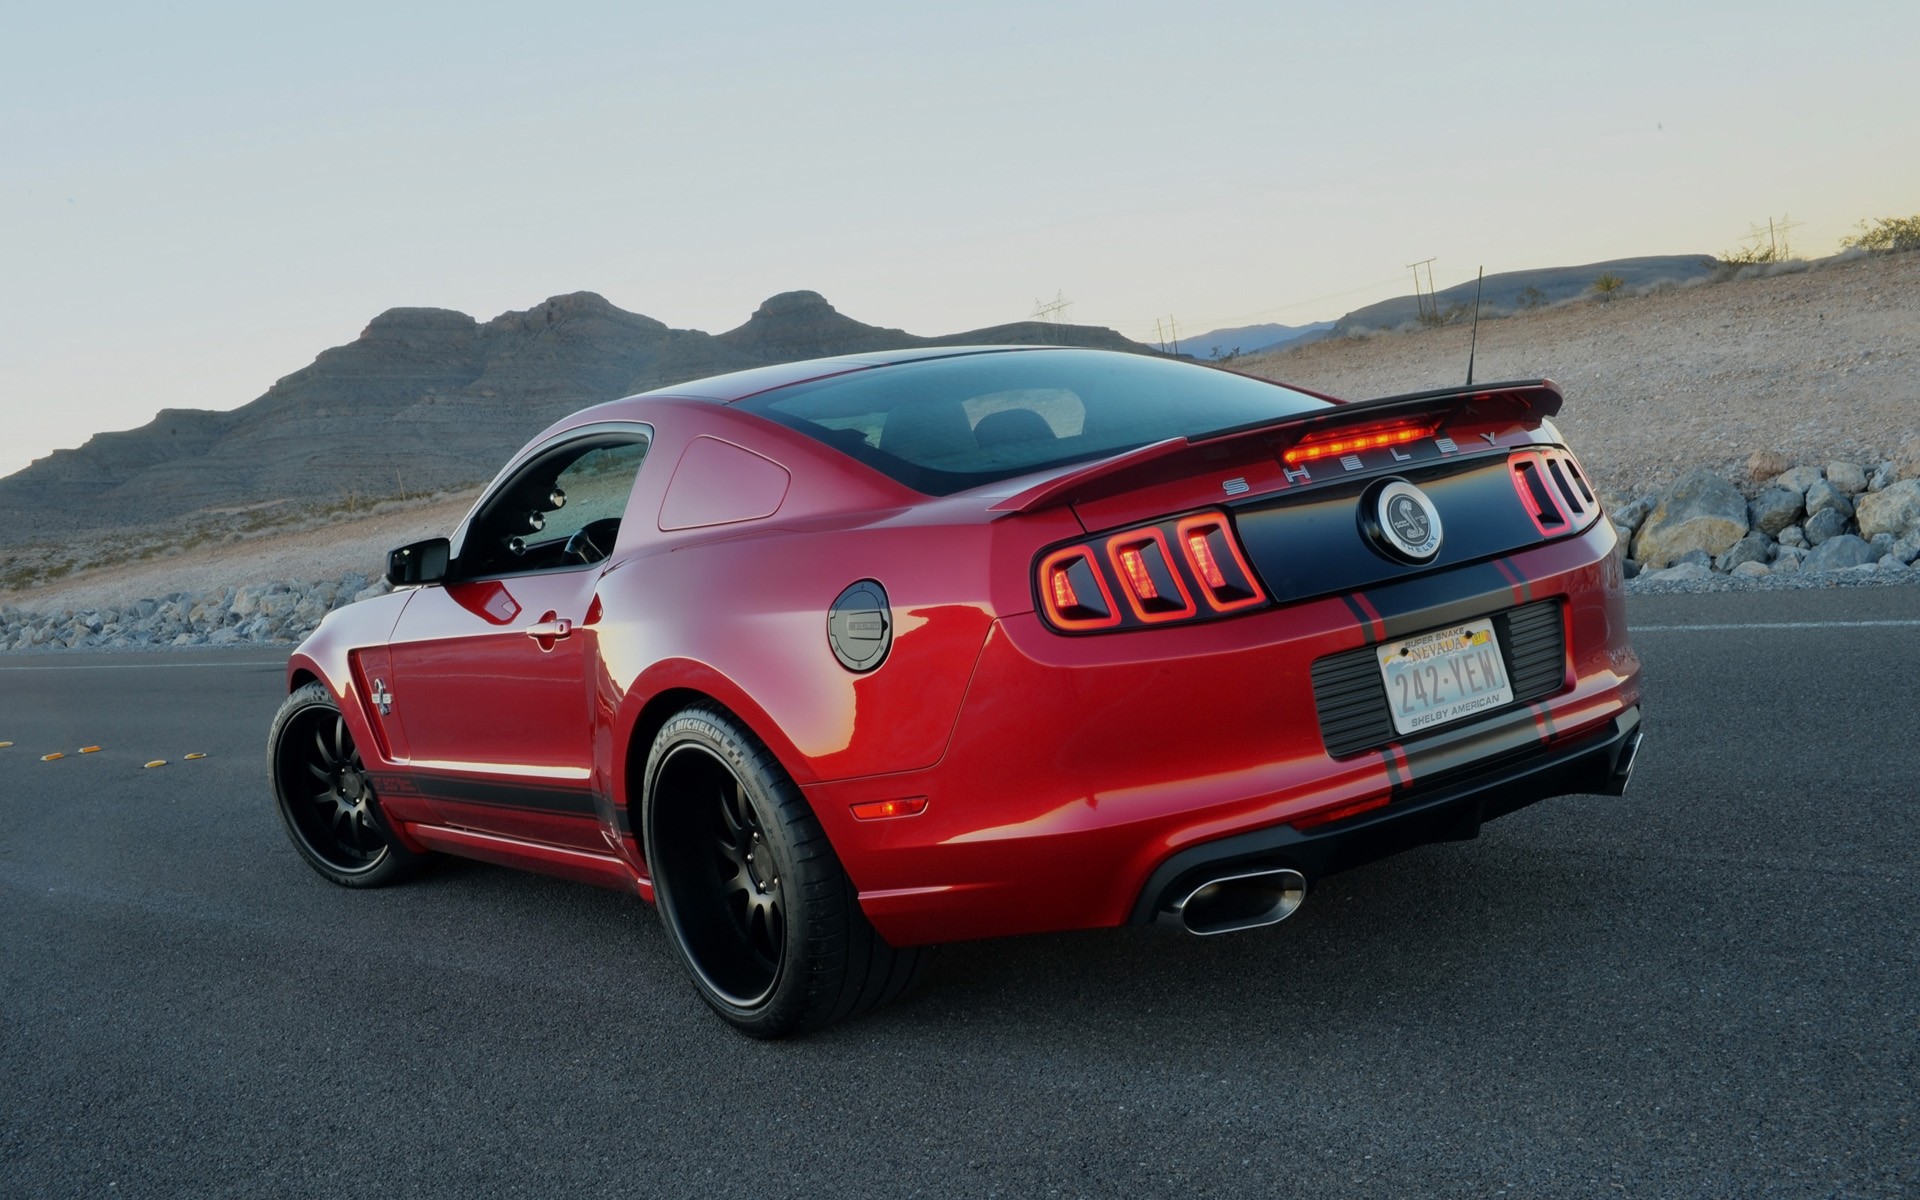 General 1920x1200 Shelby Ford Mustang Shelby car road asphalt red cars vehicle Ford Ford Mustang S-197 II Ford Mustang muscle cars American cars racing stripes